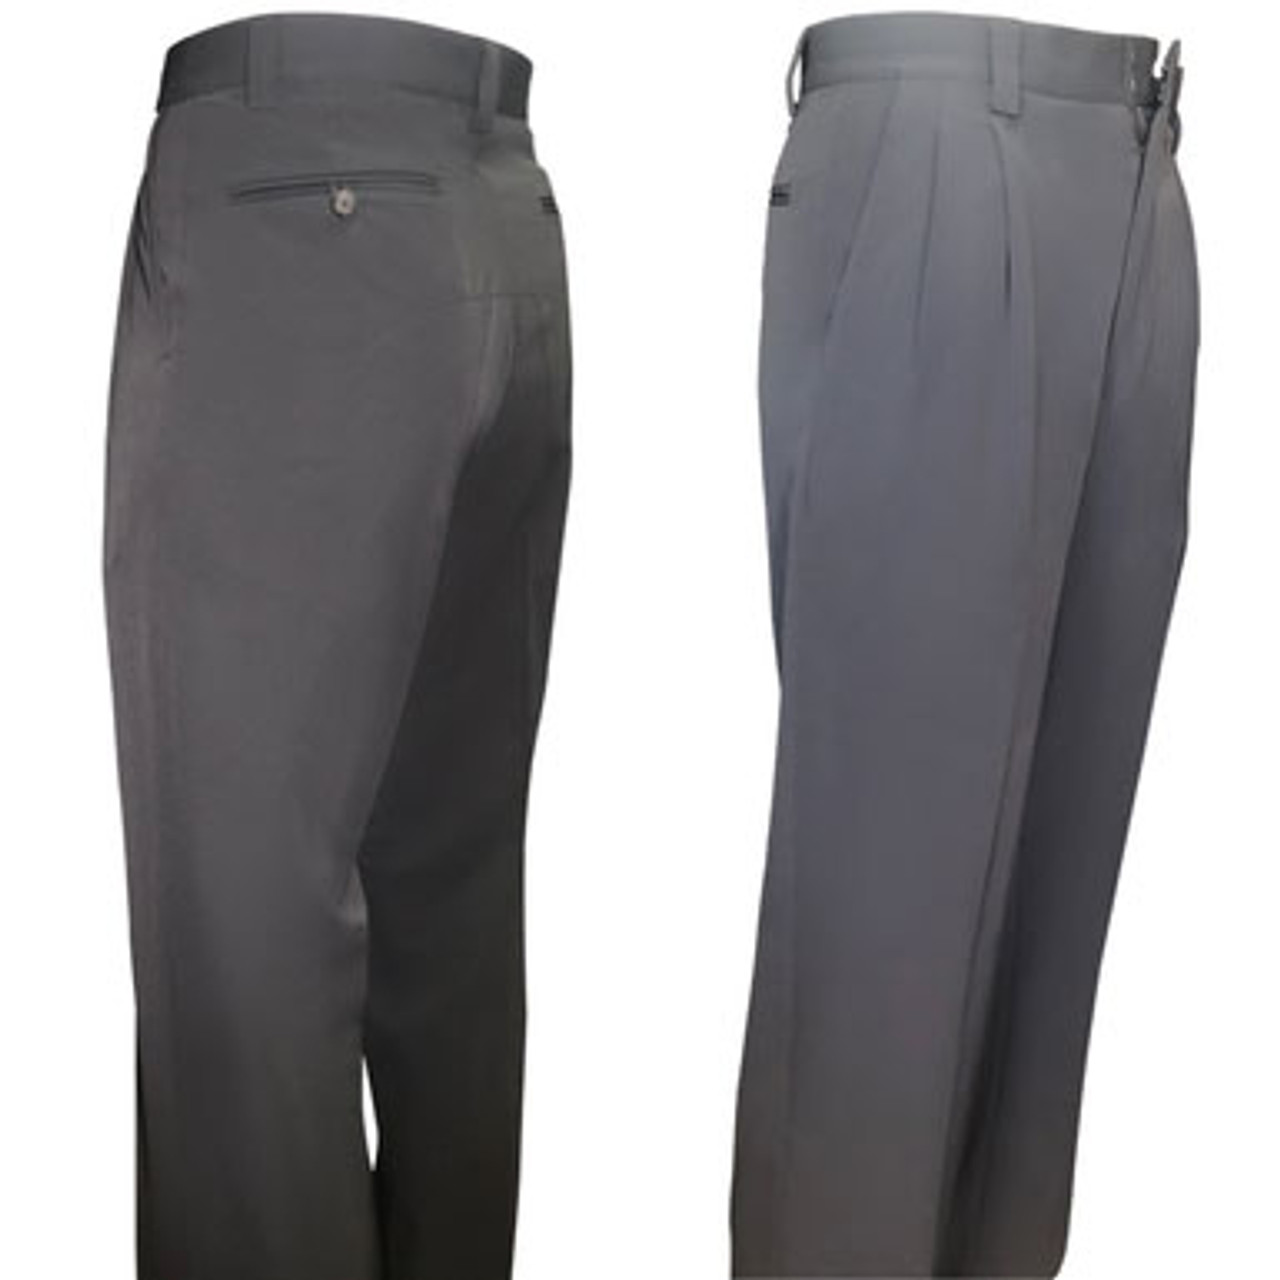 Referee Store | Smitty Plate Umpire Pants (2 Colors) Black & White 38